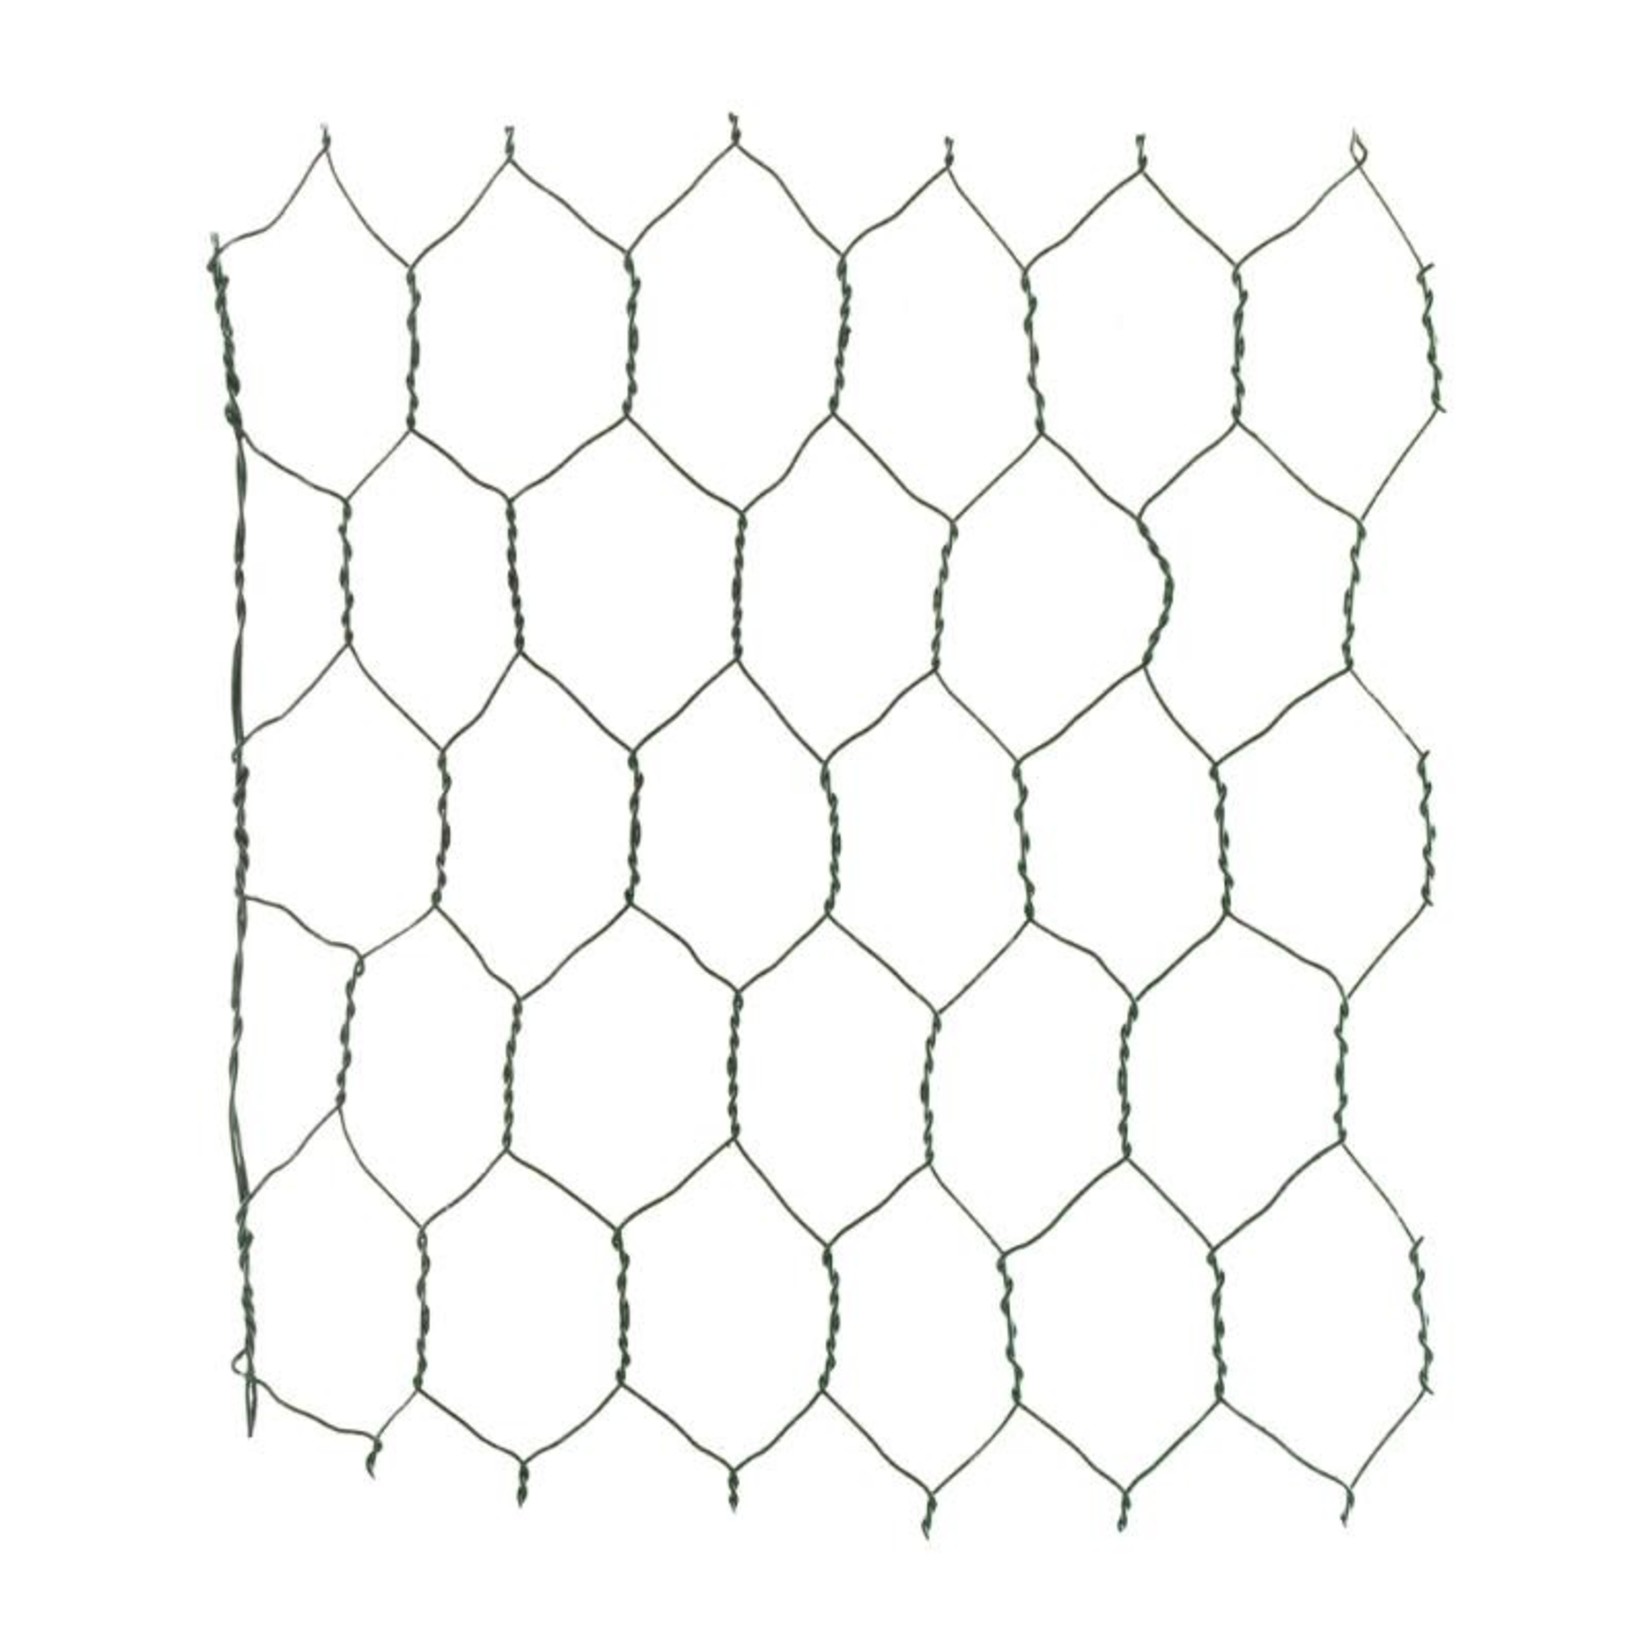 18 Florist Netting, Green, 150 ft./roll chicken wire BOX CAN BE MARKED  RS3604 - QUALITY WHOLESALE